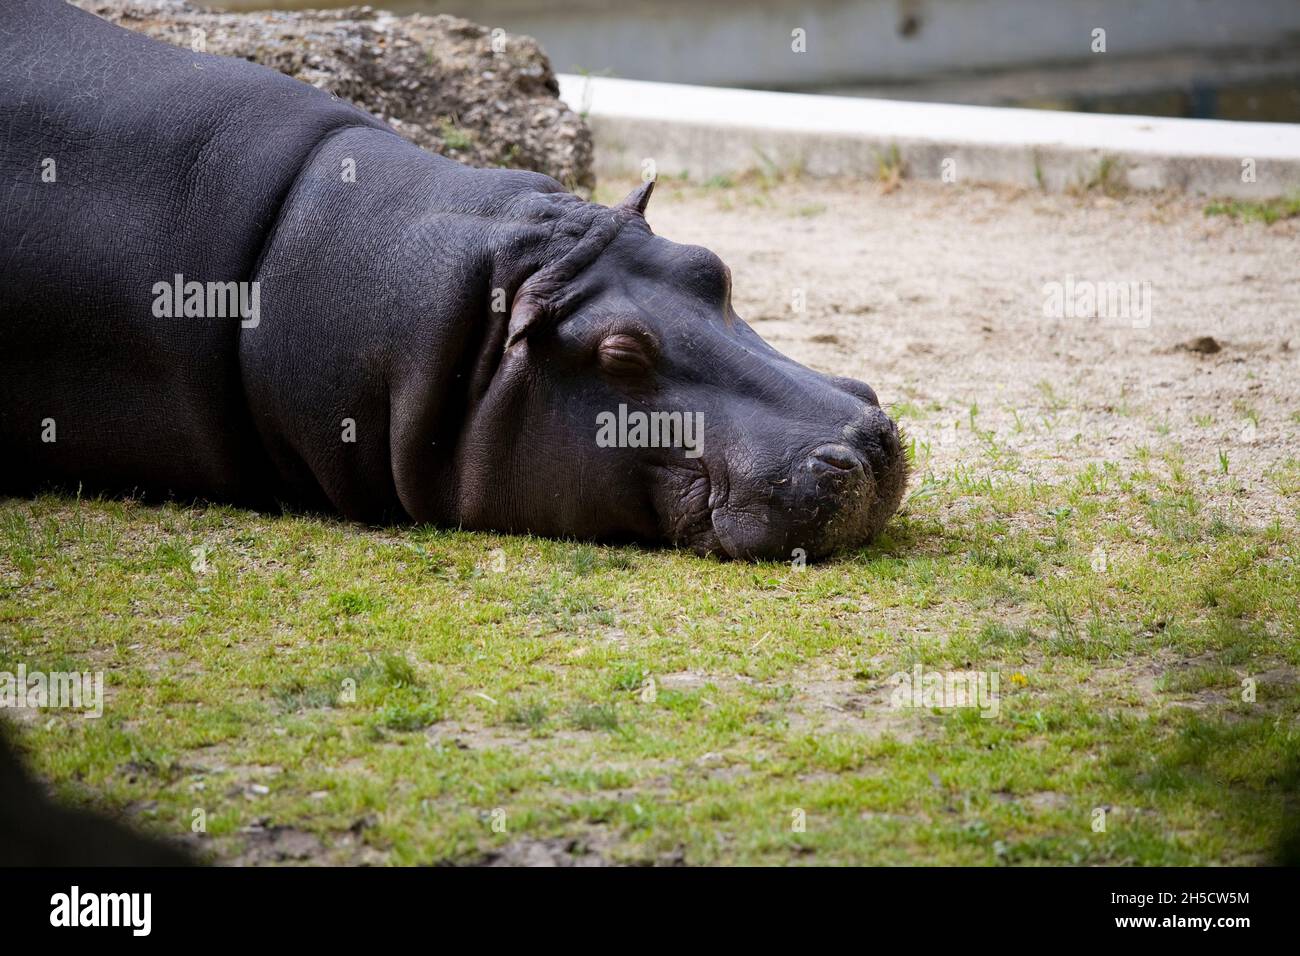 hippopotamus, hippo, Common hippopotamus (Hippopotamus amphibius), sleeps in an outdoor enclosure at a zoo Stock Photo